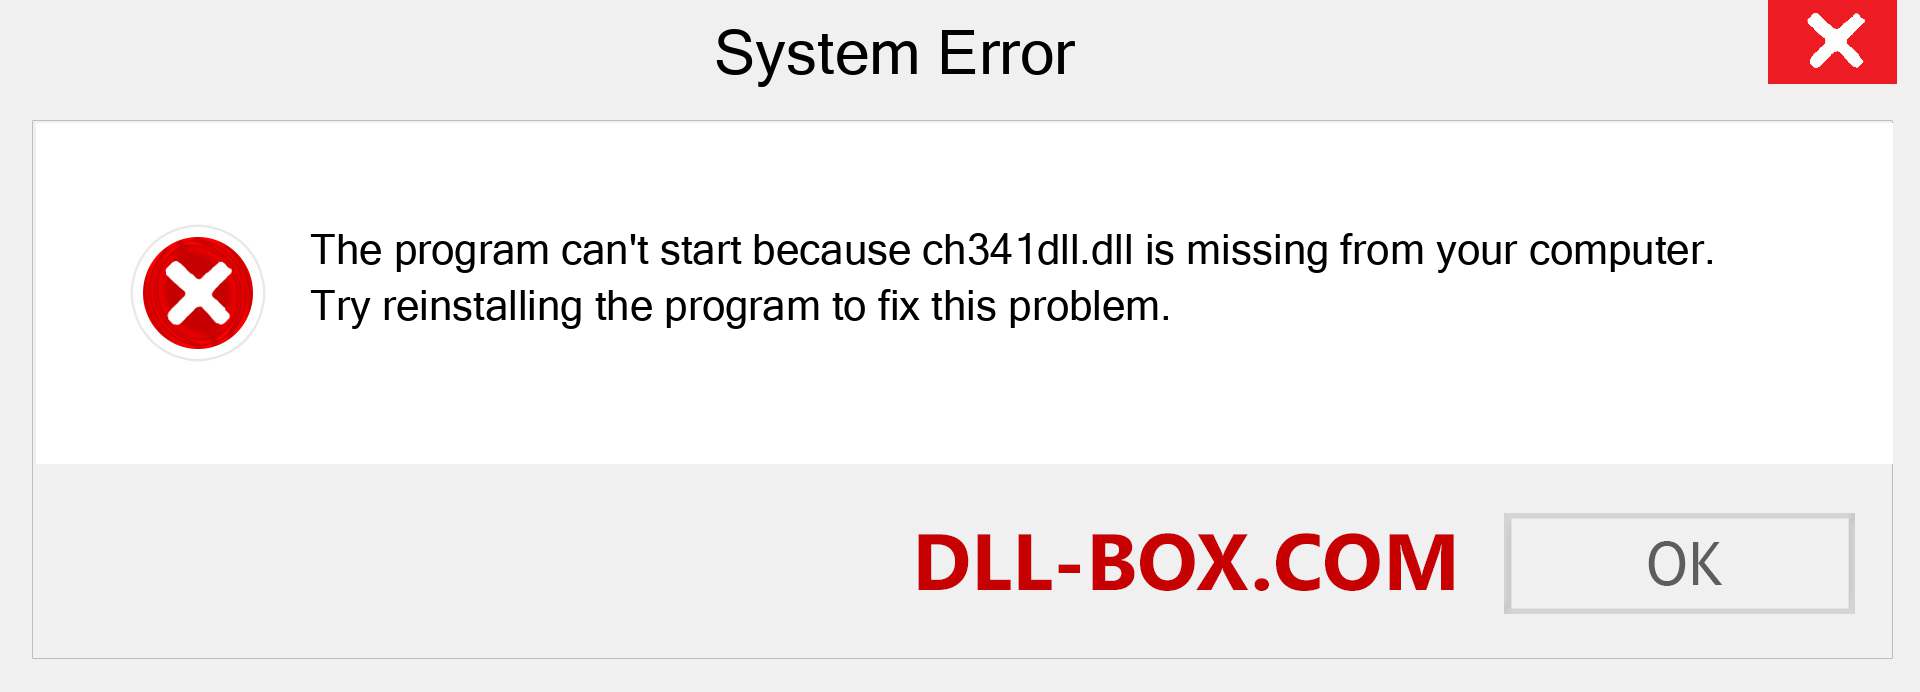  ch341dll.dll file is missing?. Download for Windows 7, 8, 10 - Fix  ch341dll dll Missing Error on Windows, photos, images